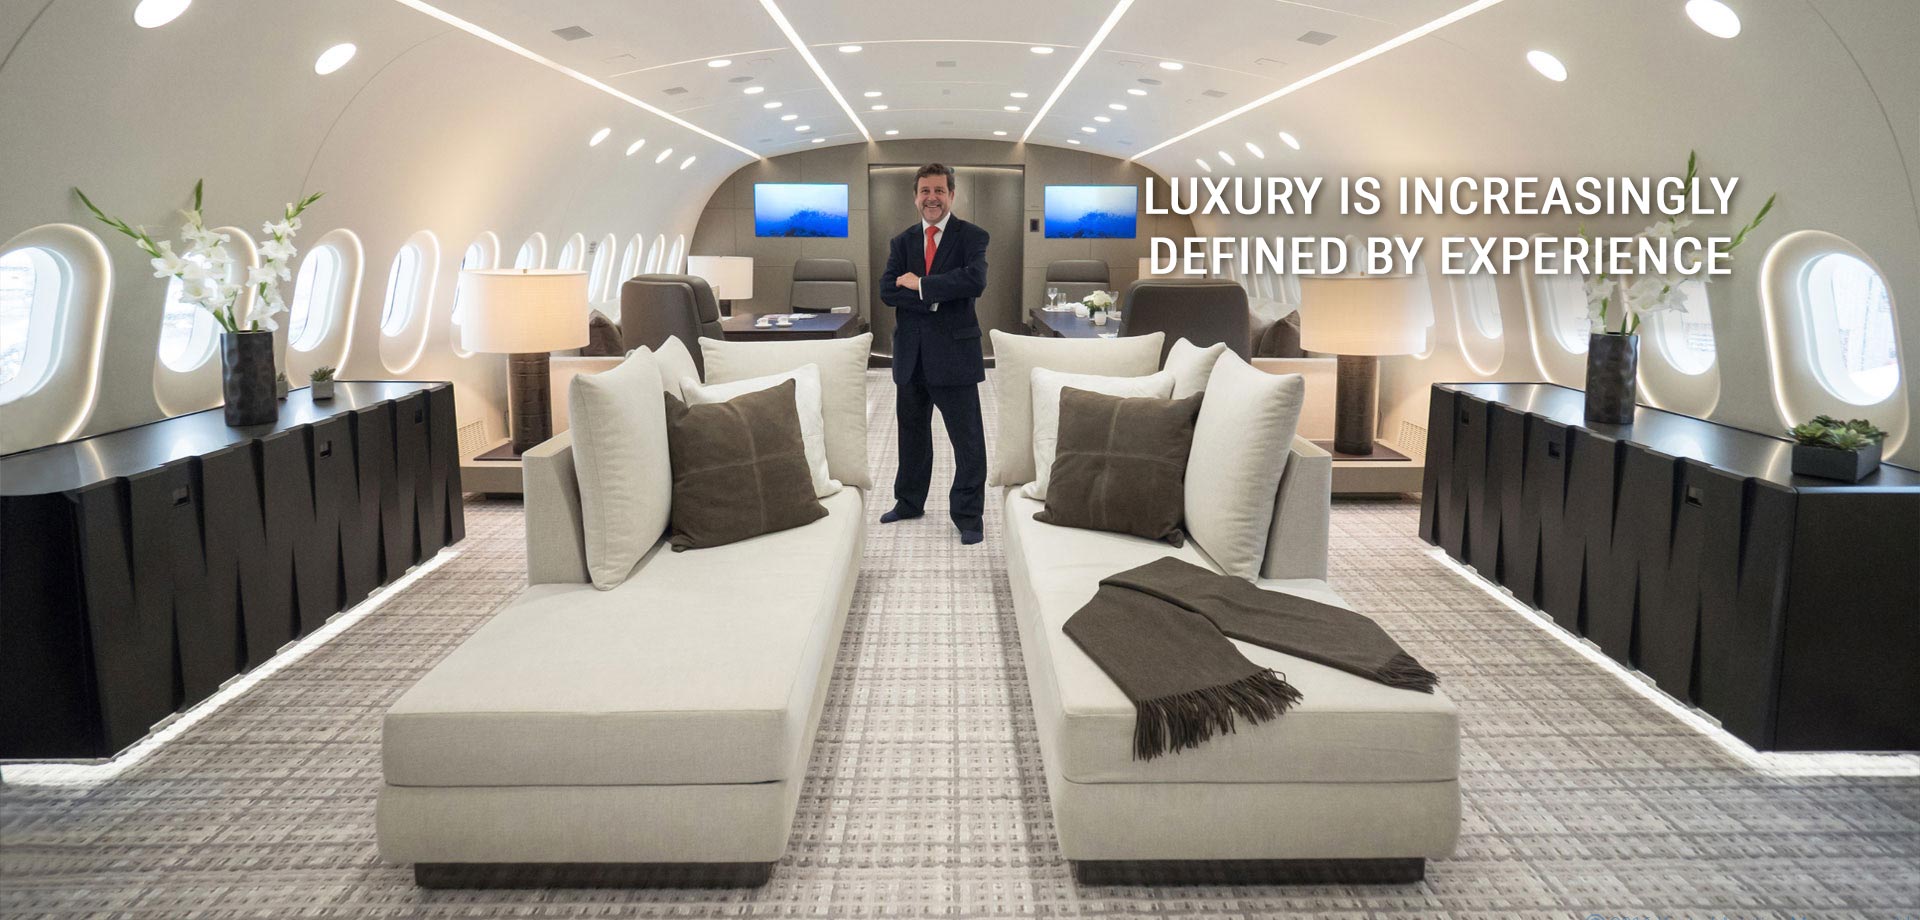 Luxury is Increasingly Defined by Experience